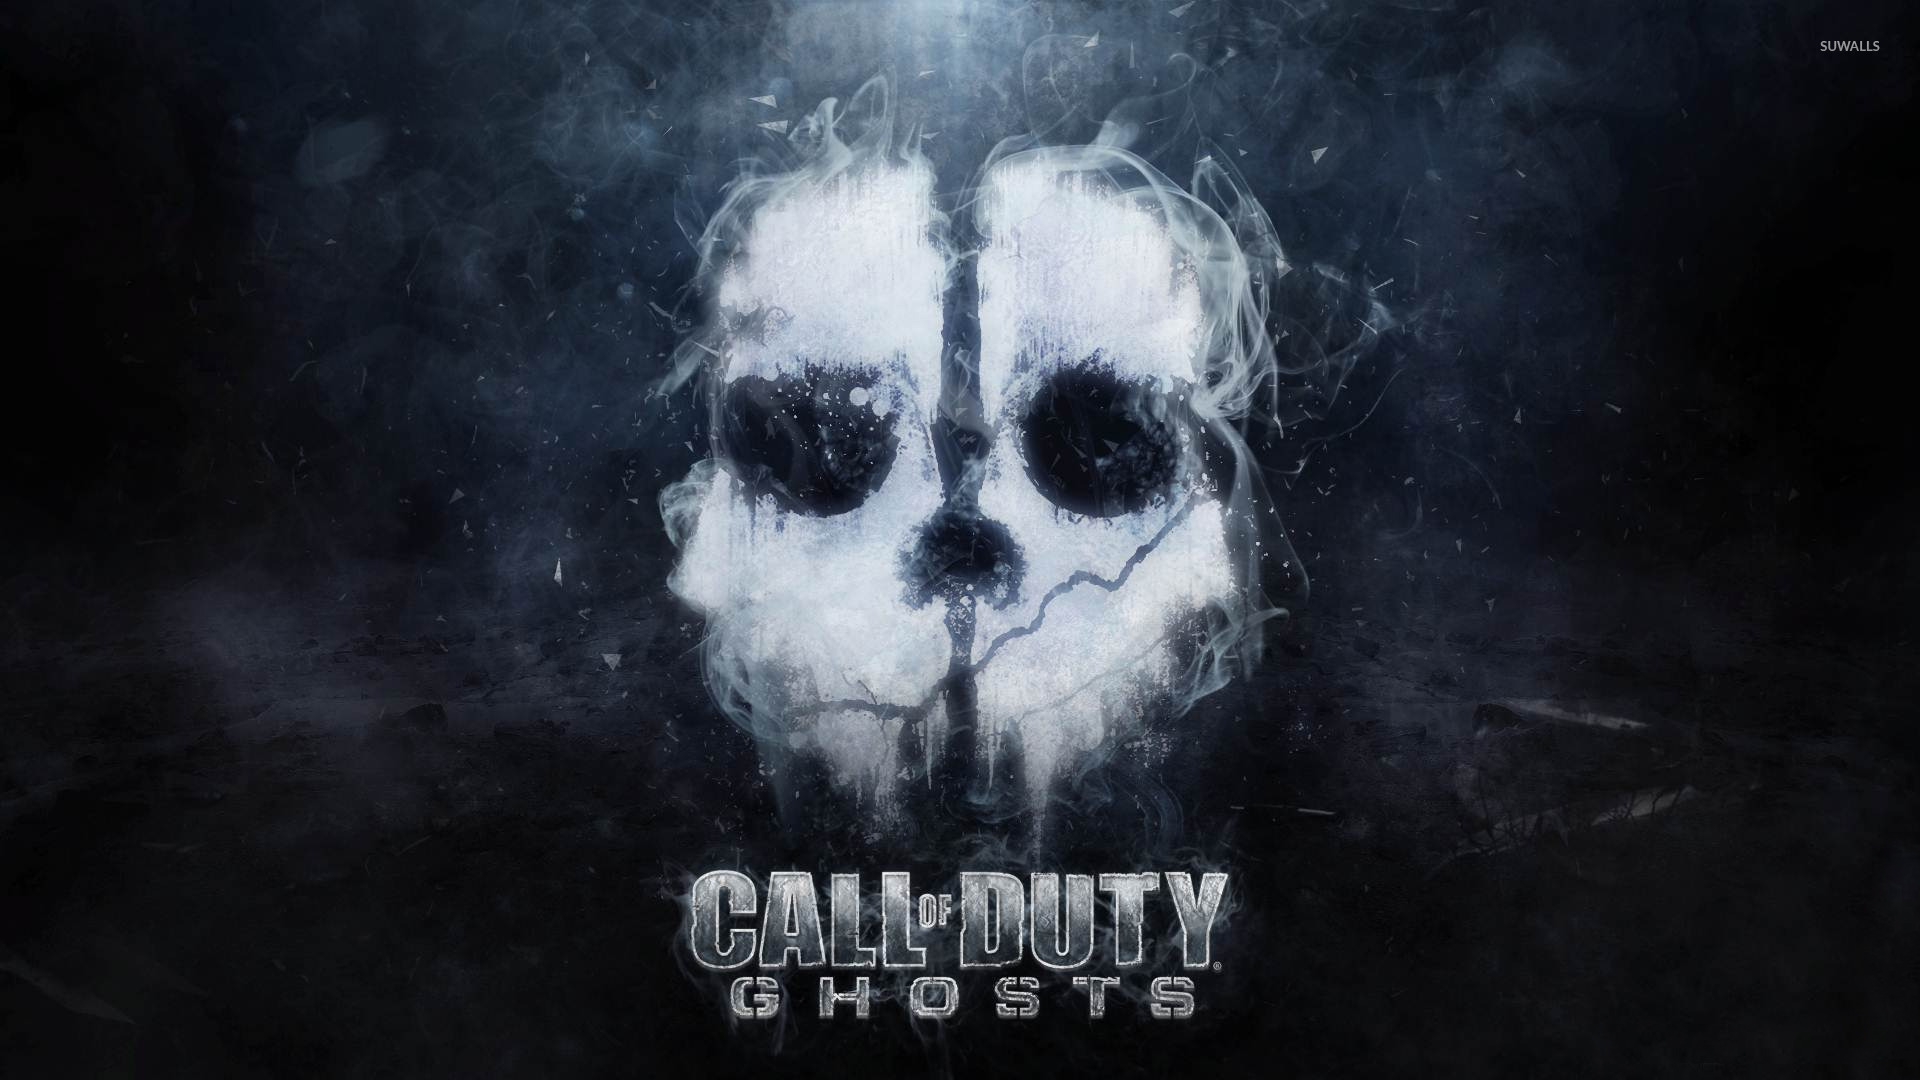 Call of Duty Ghosts wallpaper   Game wallpapers   20517